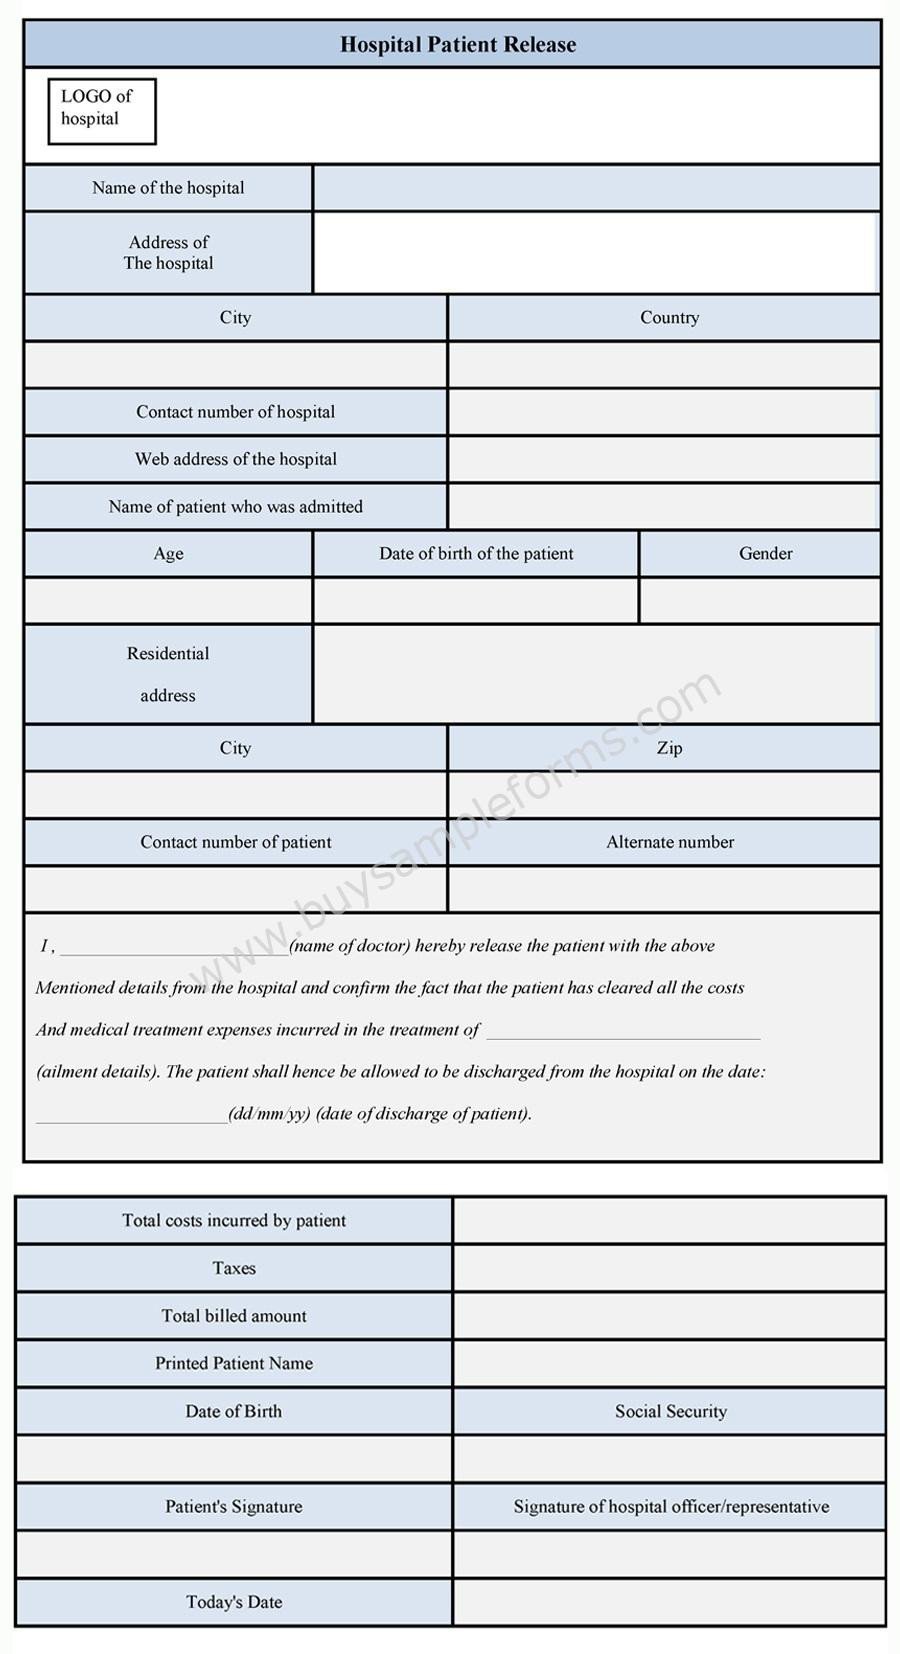 Hospital Patient Release Form Sample Forms